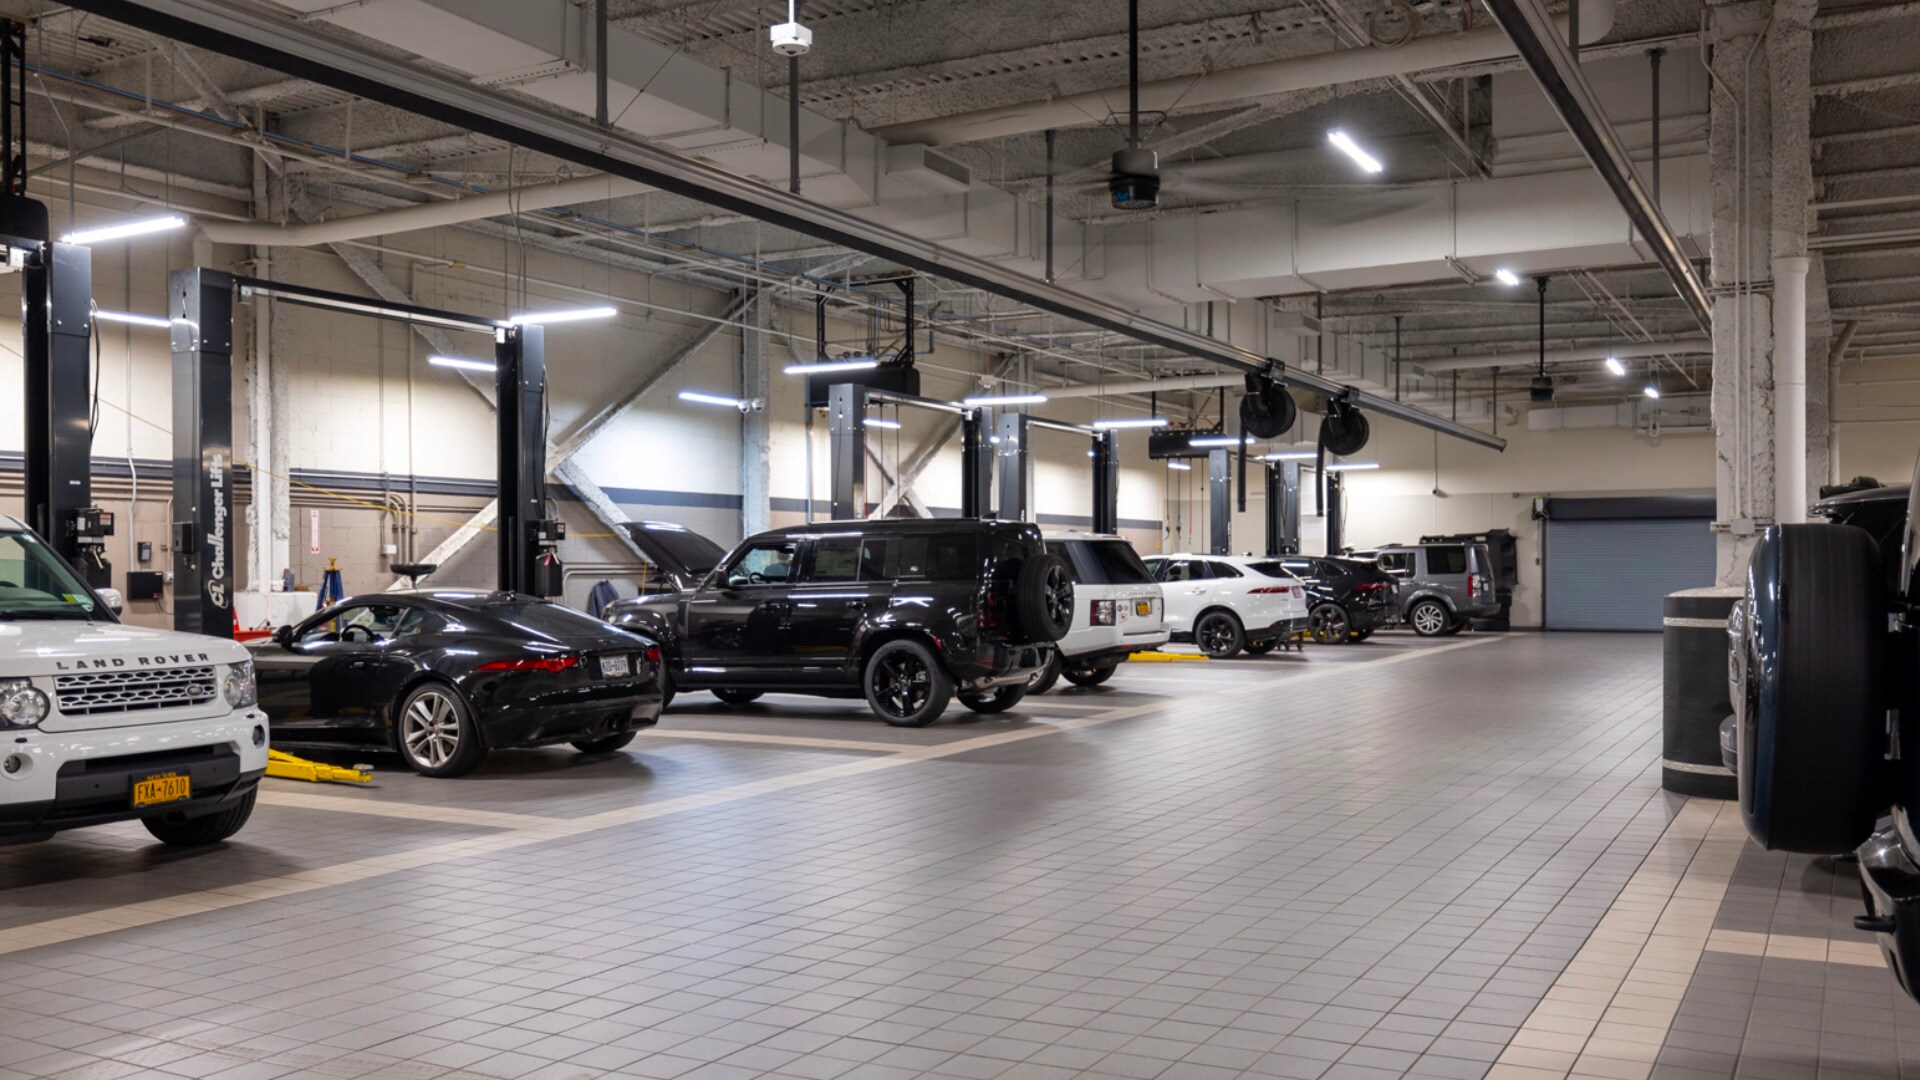 Interior of Land Rover New Rochelle service center. Vehicle service bays are seen with many vehicles ready to be worked on.